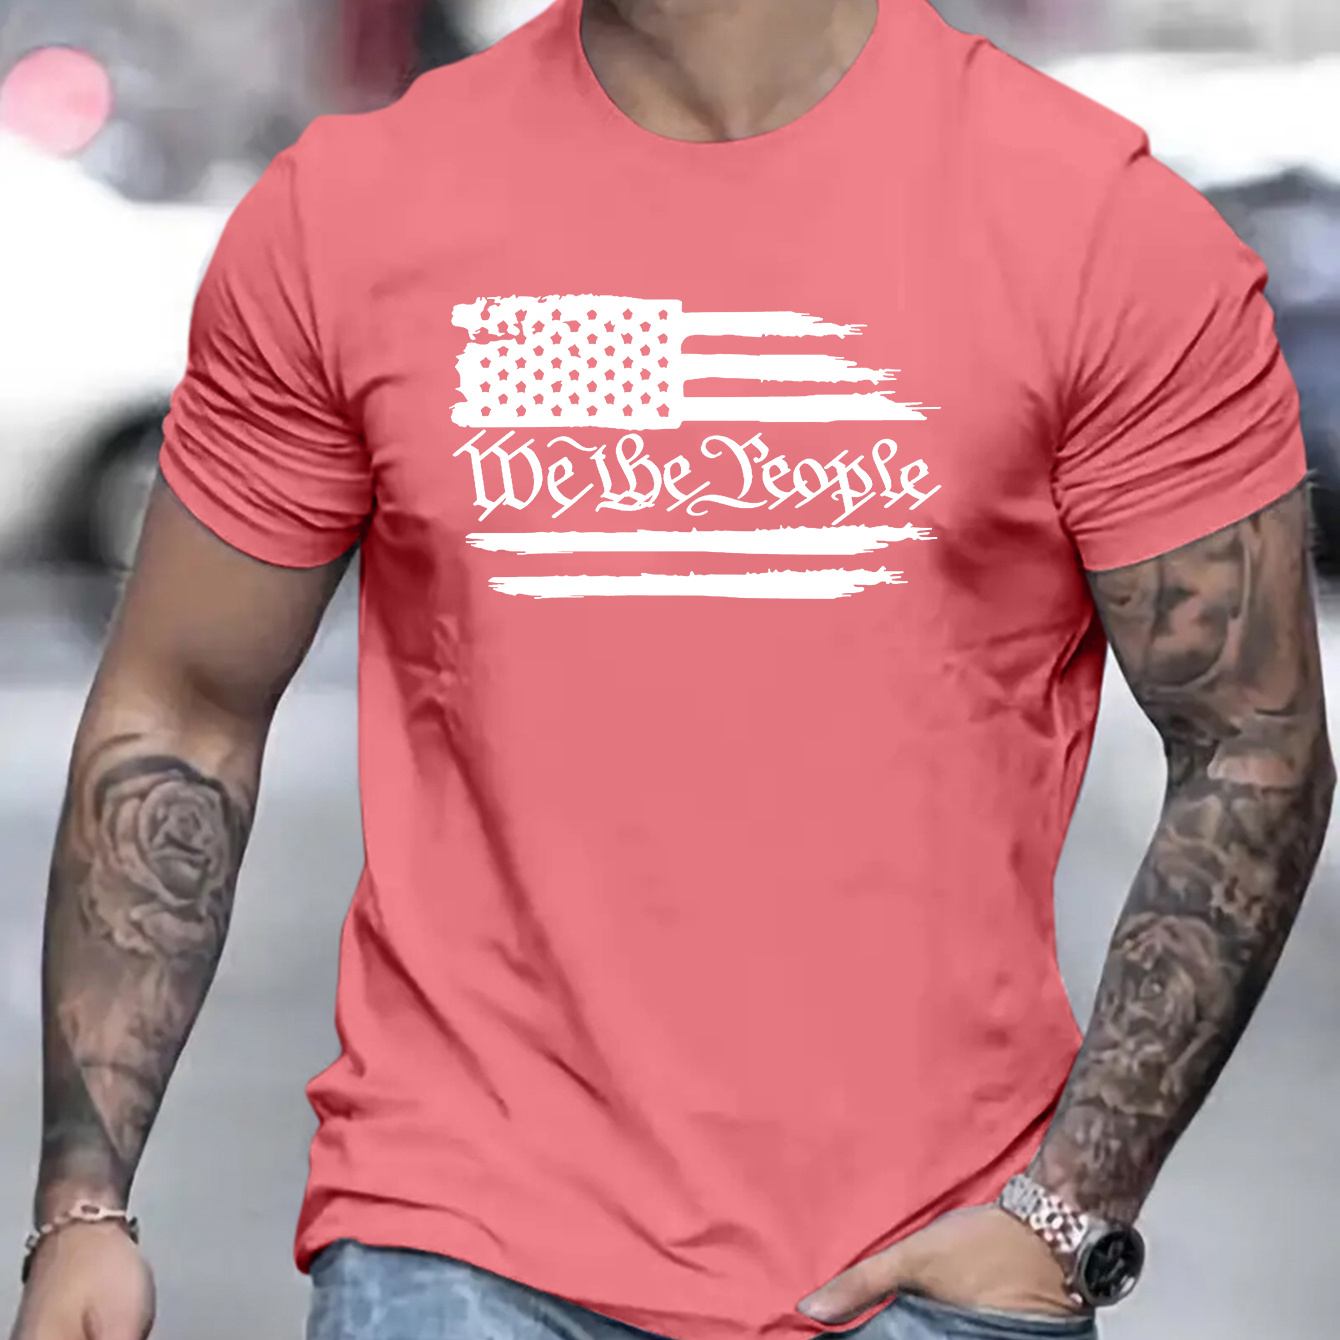 

We The People Print T Shirt, Tees For Men, Casual Short Sleeve T-shirt For Summer